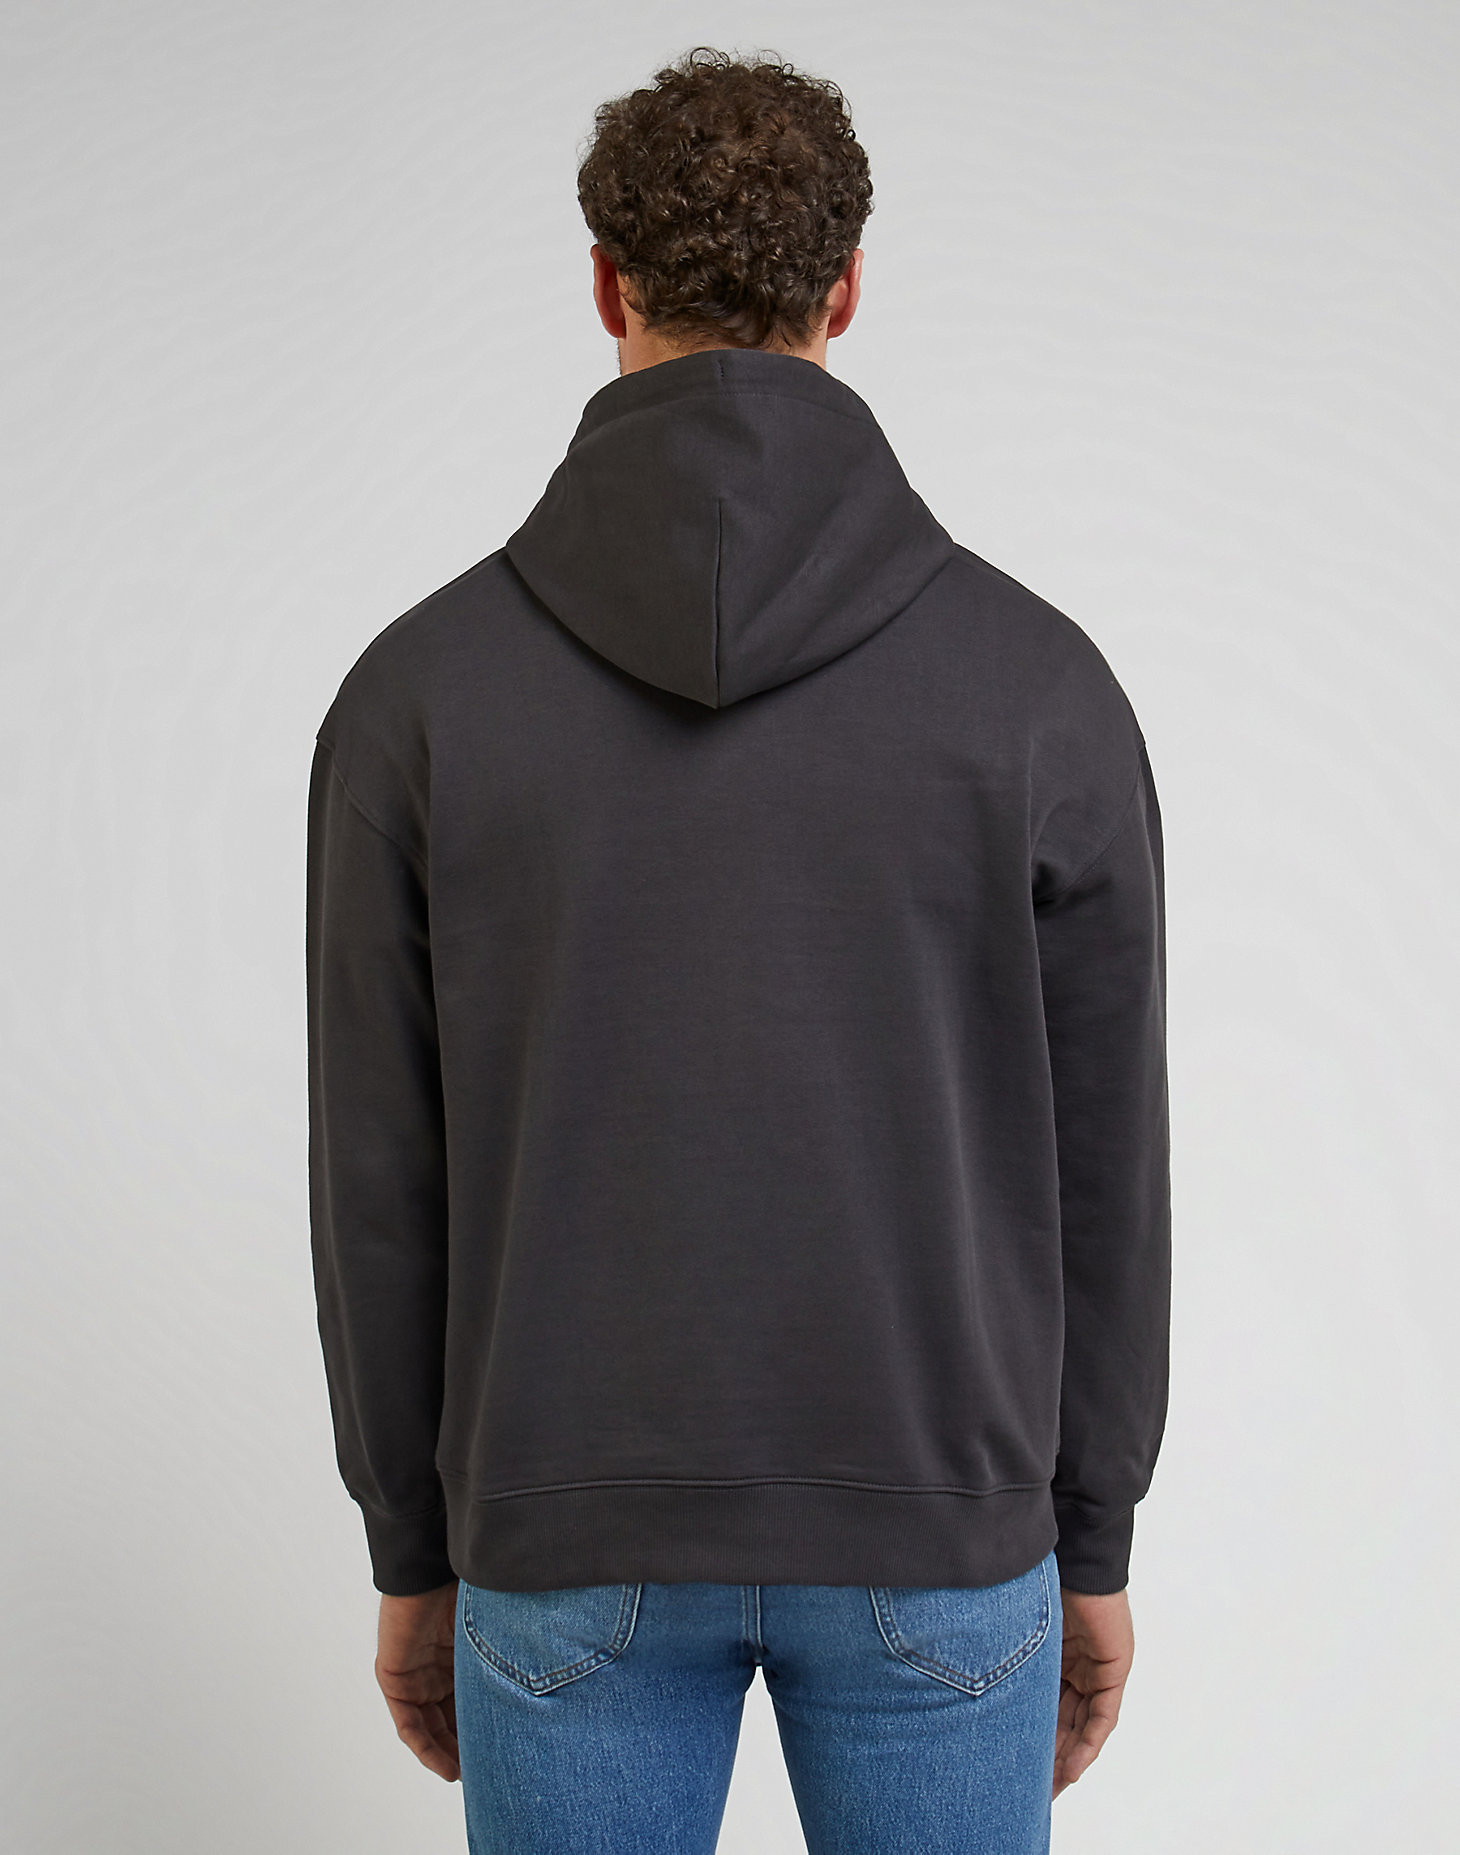 Core Loose Hoodie in Washed Black alternative view 1